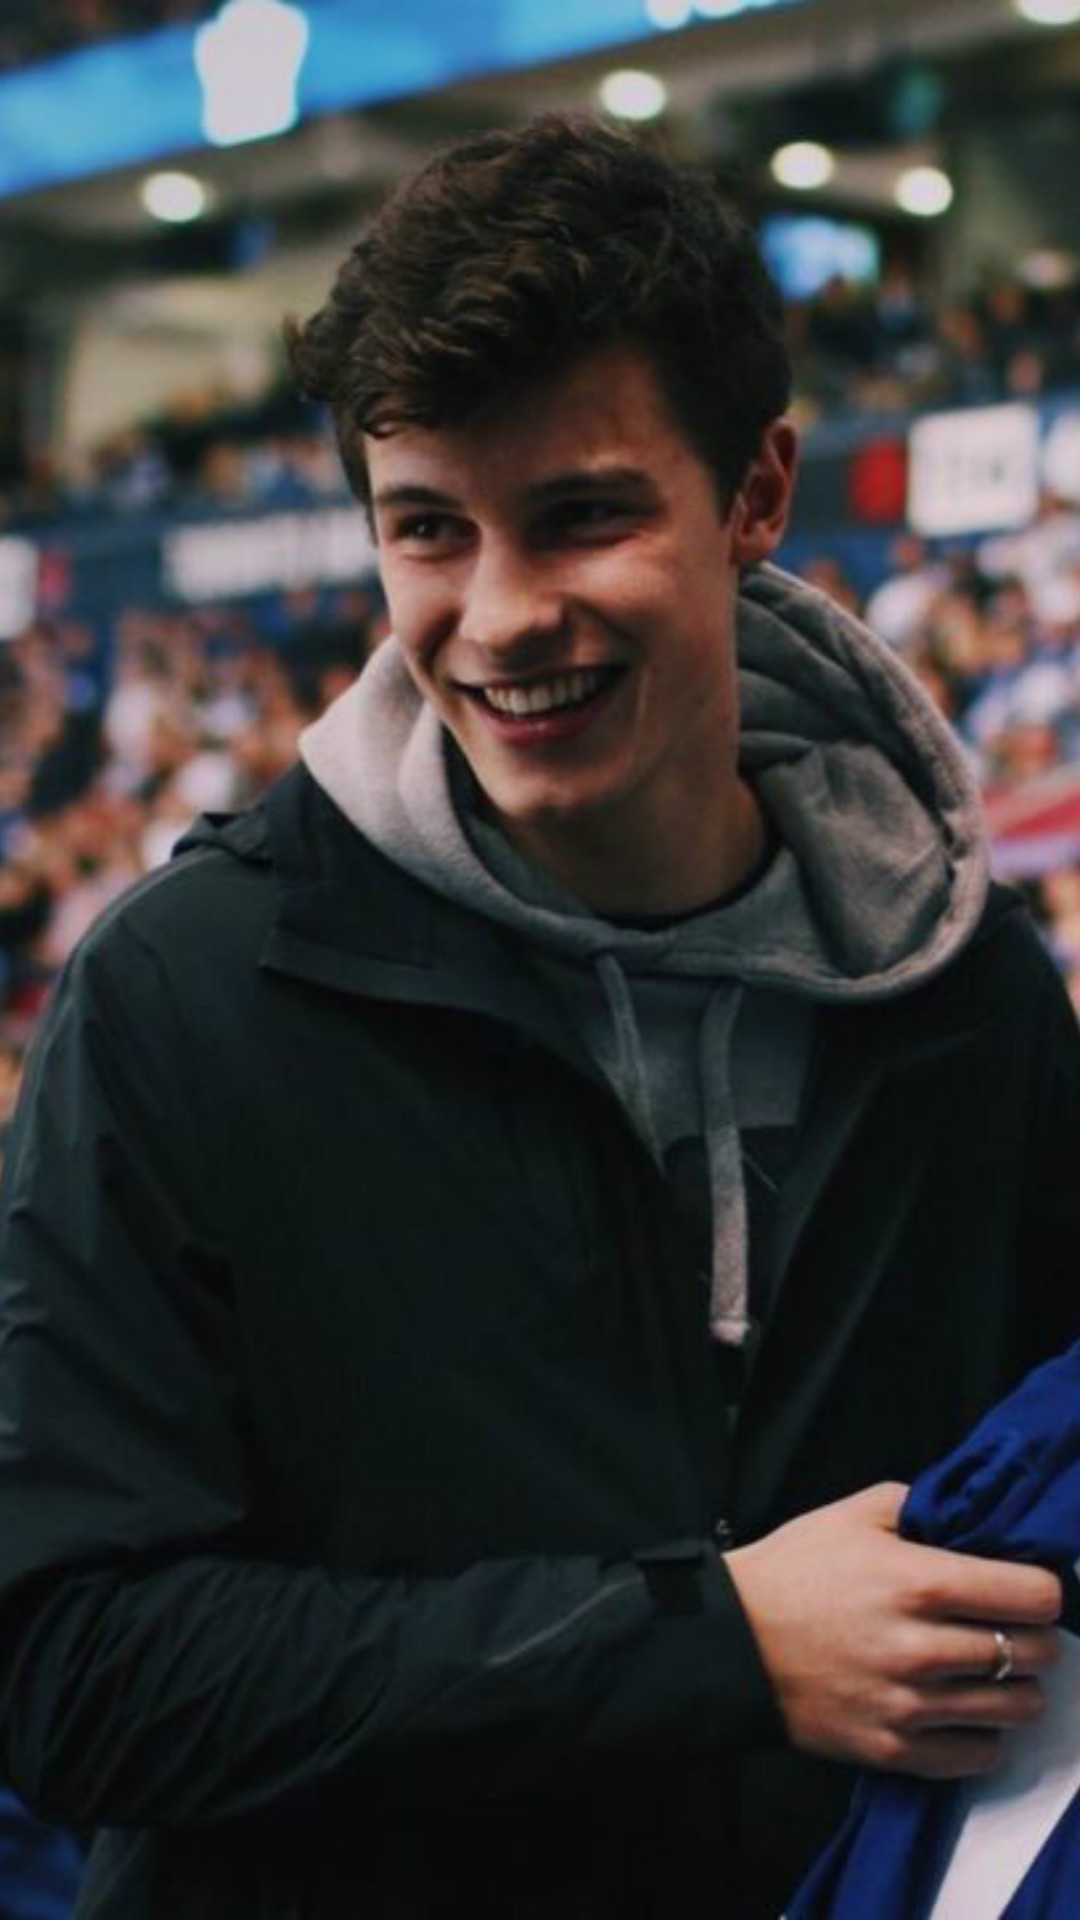 shawn mendes wallpaper hd,product,jacket,coach,smile